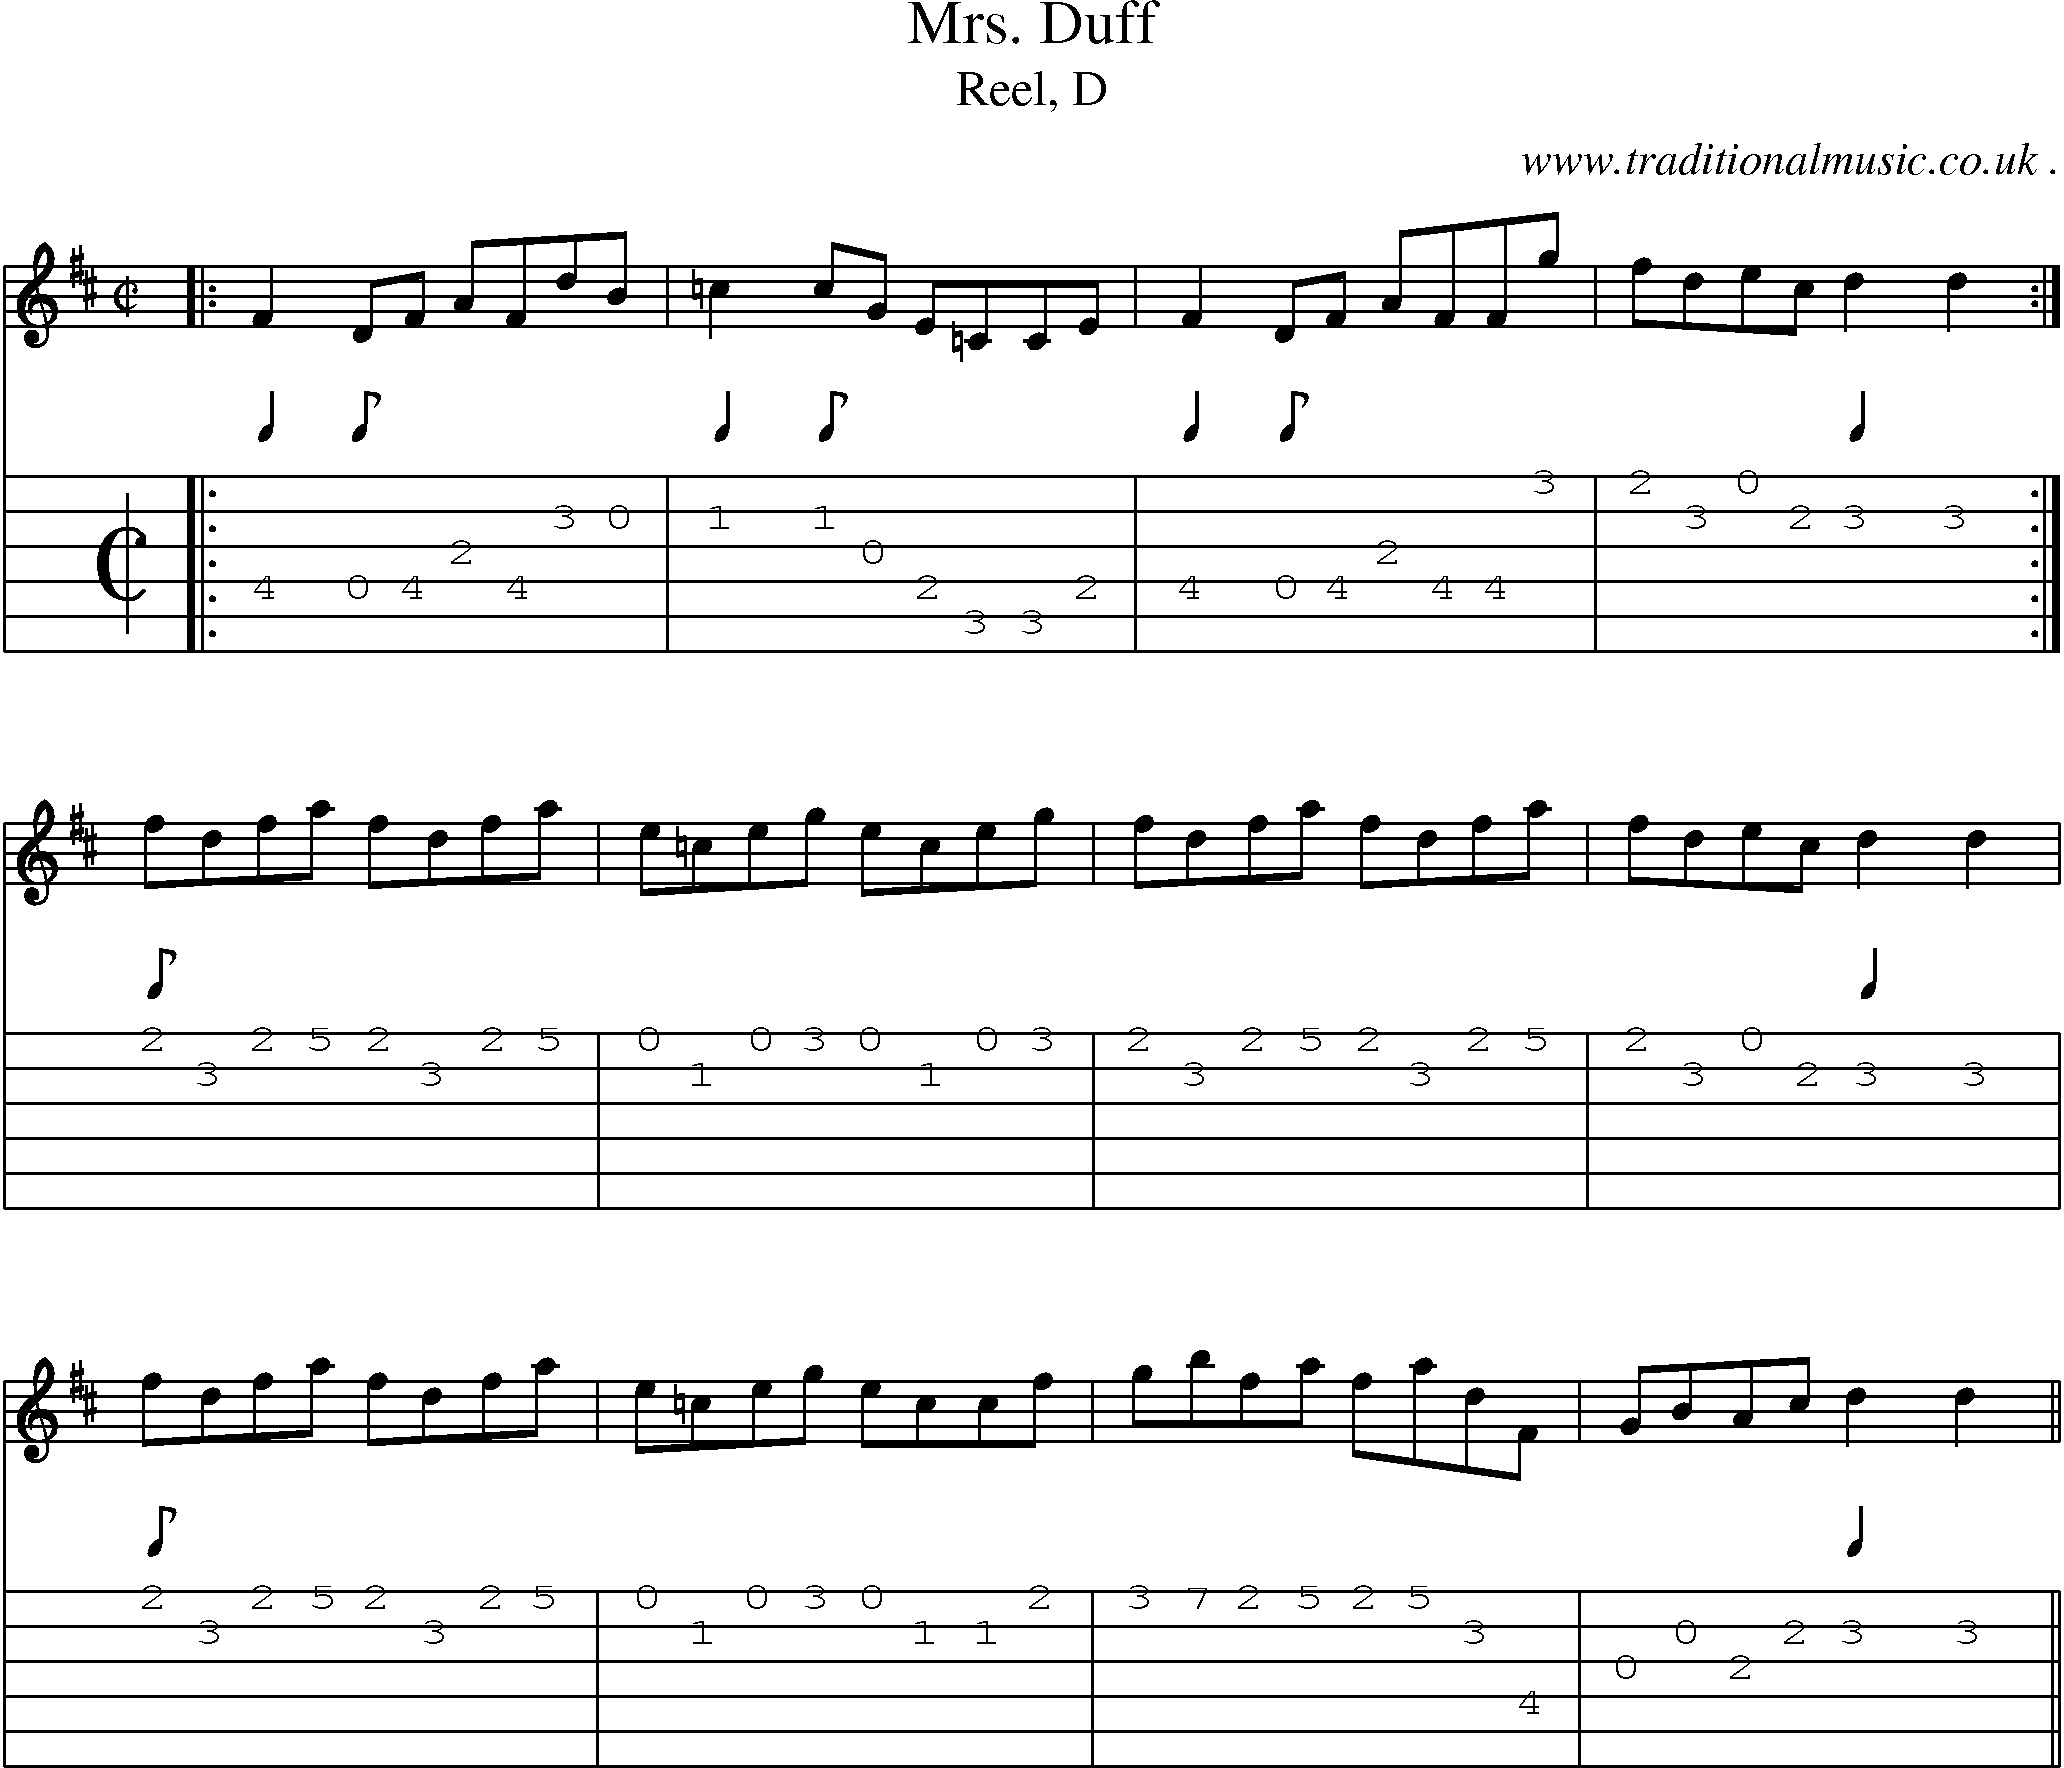 Sheet-music  score, Chords and Guitar Tabs for Mrs Duff